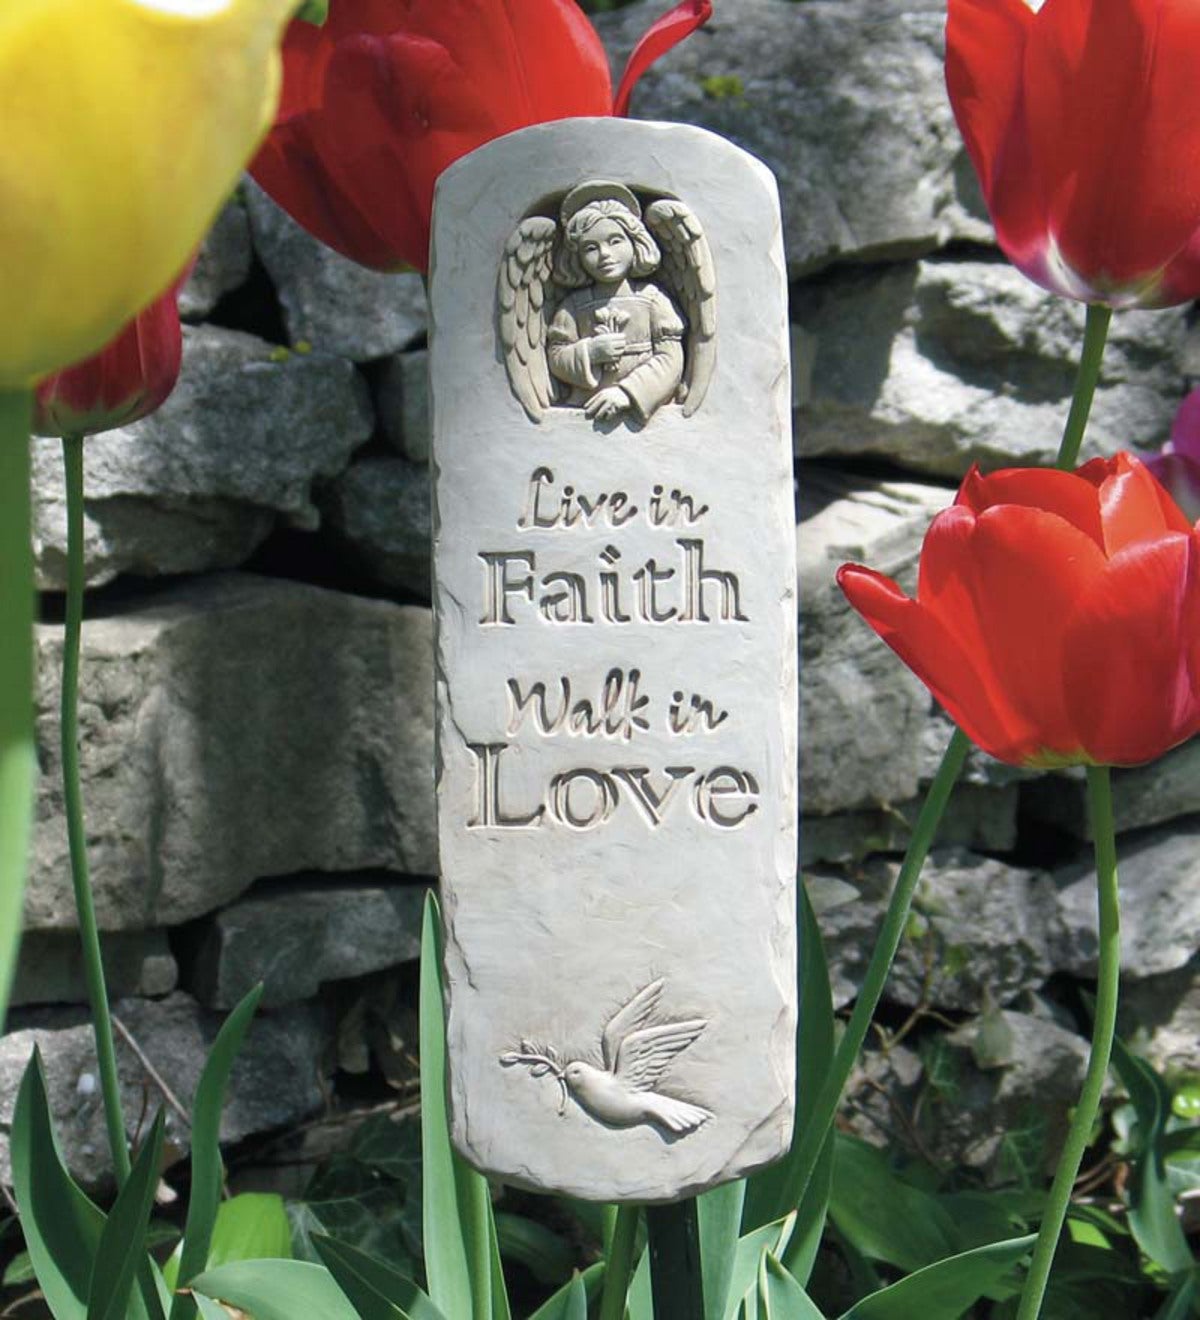 Stone Walk In Love Wall Plaque by Carruth Studio